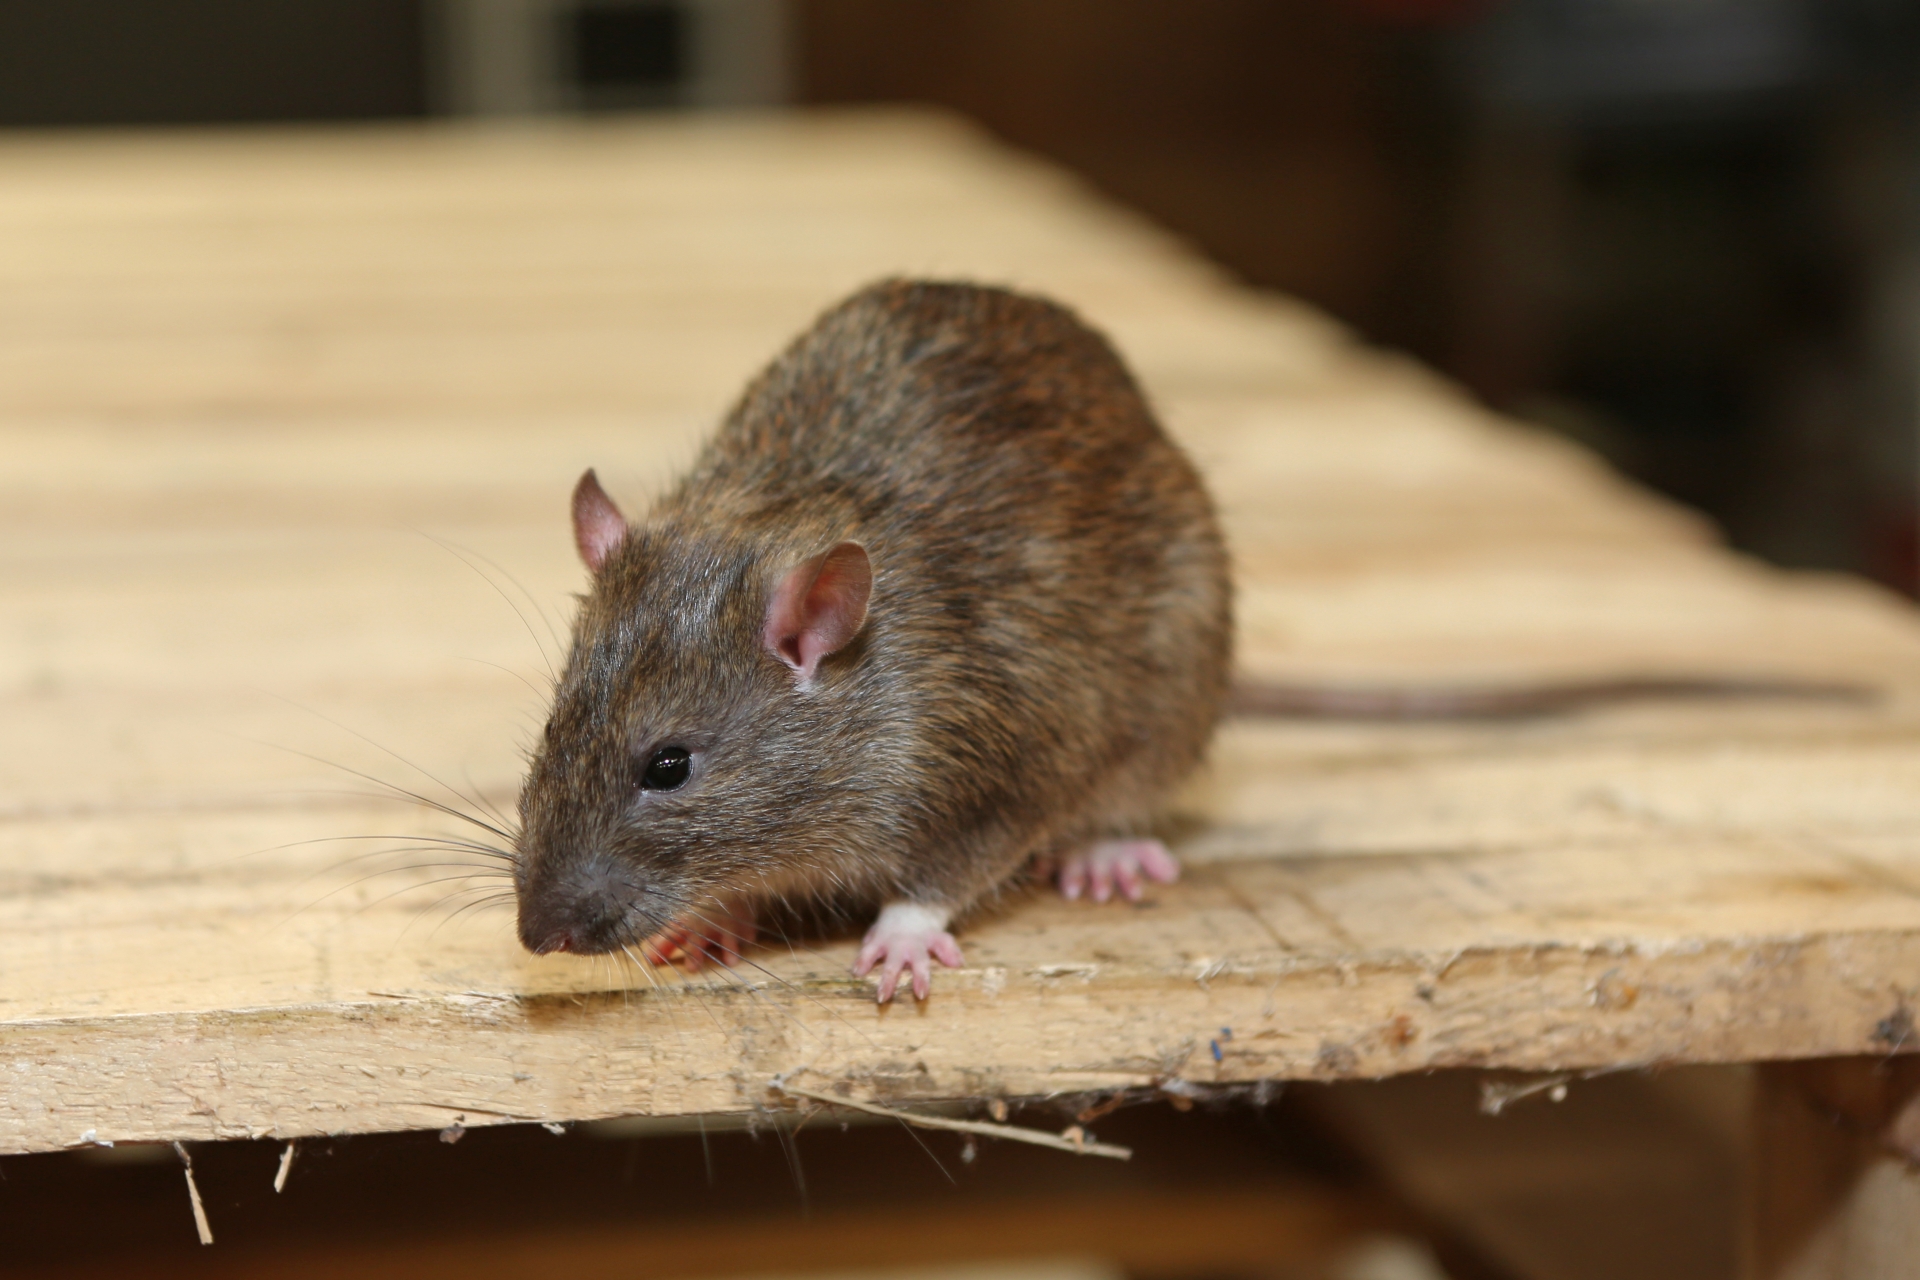 Rat Control, Pest Control in Holborn, Strand, Covent Garden, WC2. Call Now 020 8166 9746